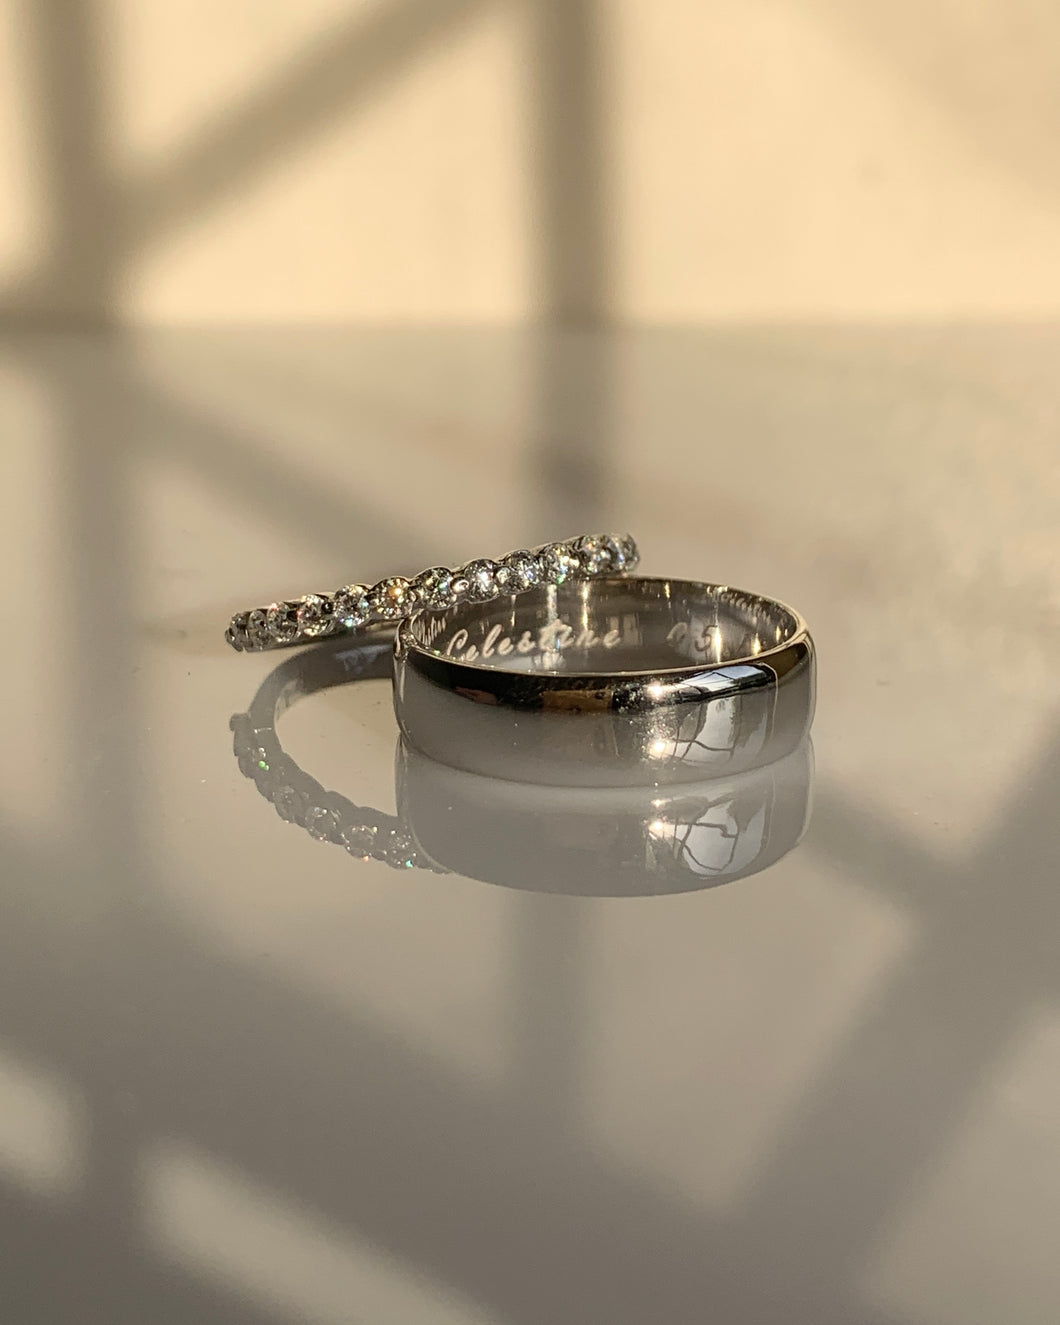 For the bride-moissanites half eternity ring set in white gold. For the groom-a simple classic white gold wedding band.